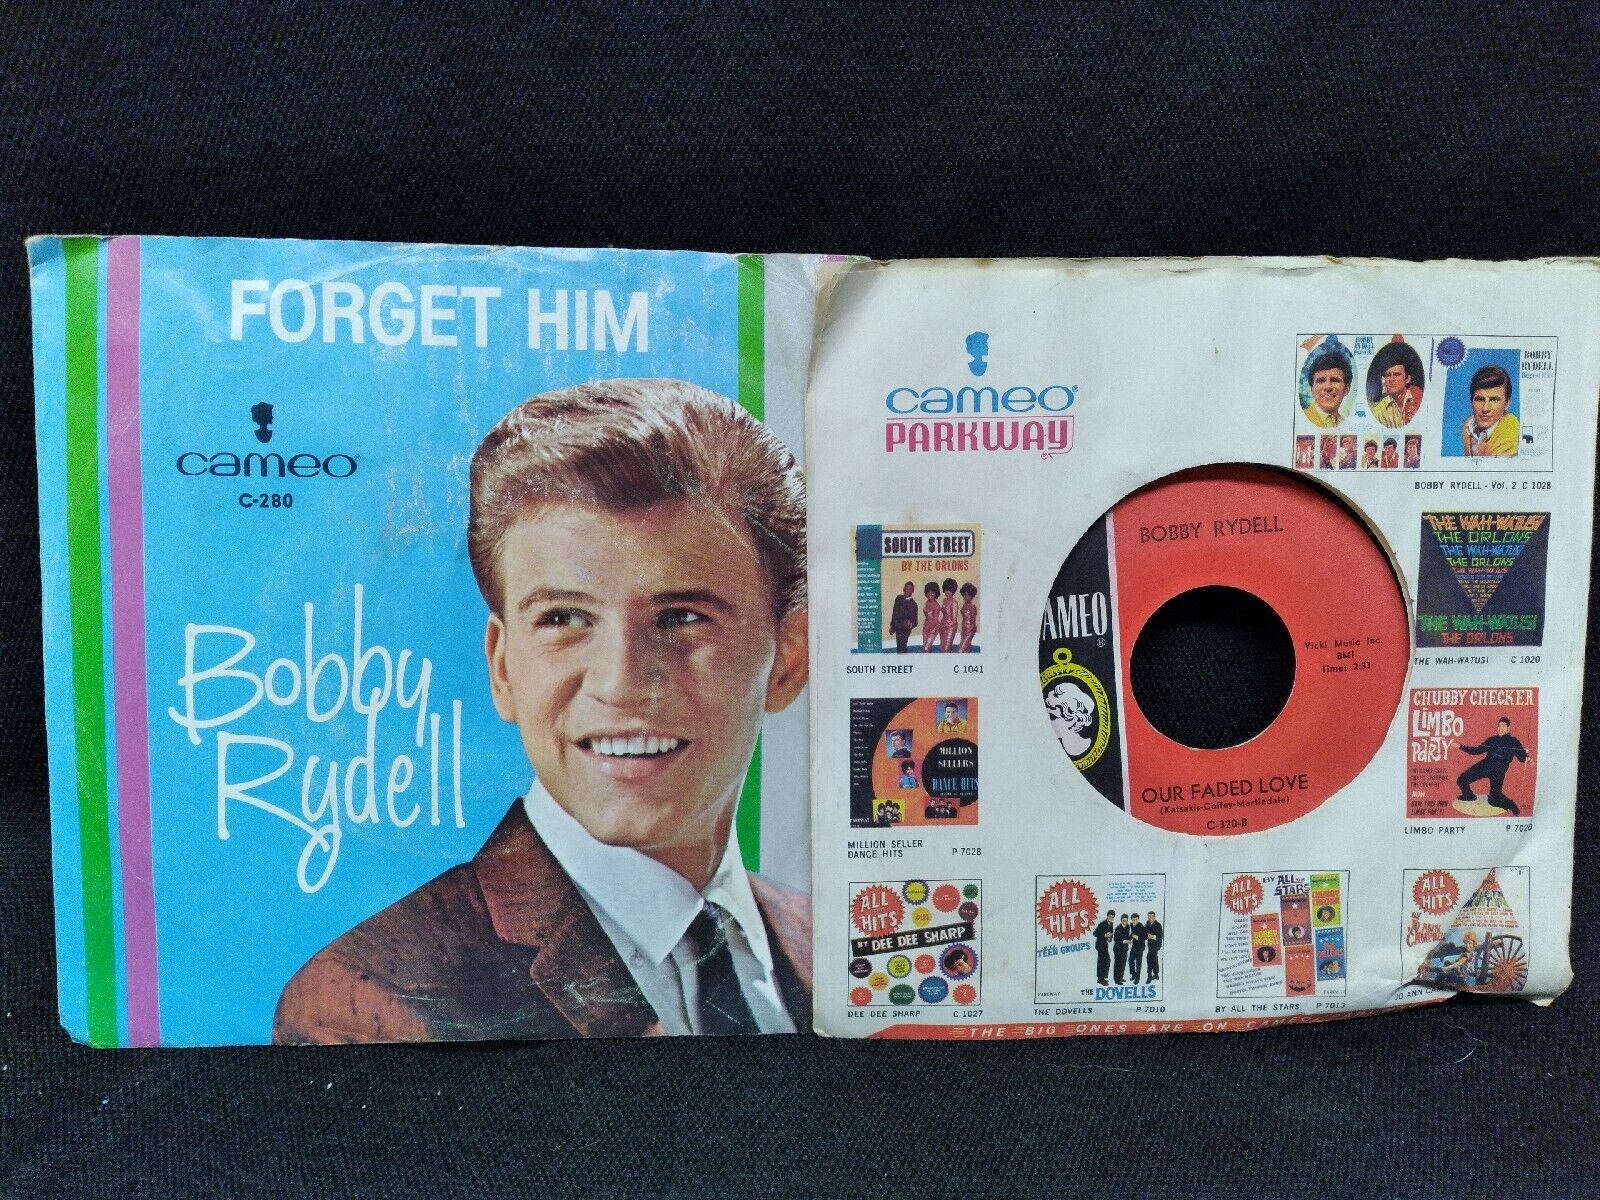 Bobby Rydell Forget Him / World Without Love 45 RPM Cameo Records Lot of 2 1963